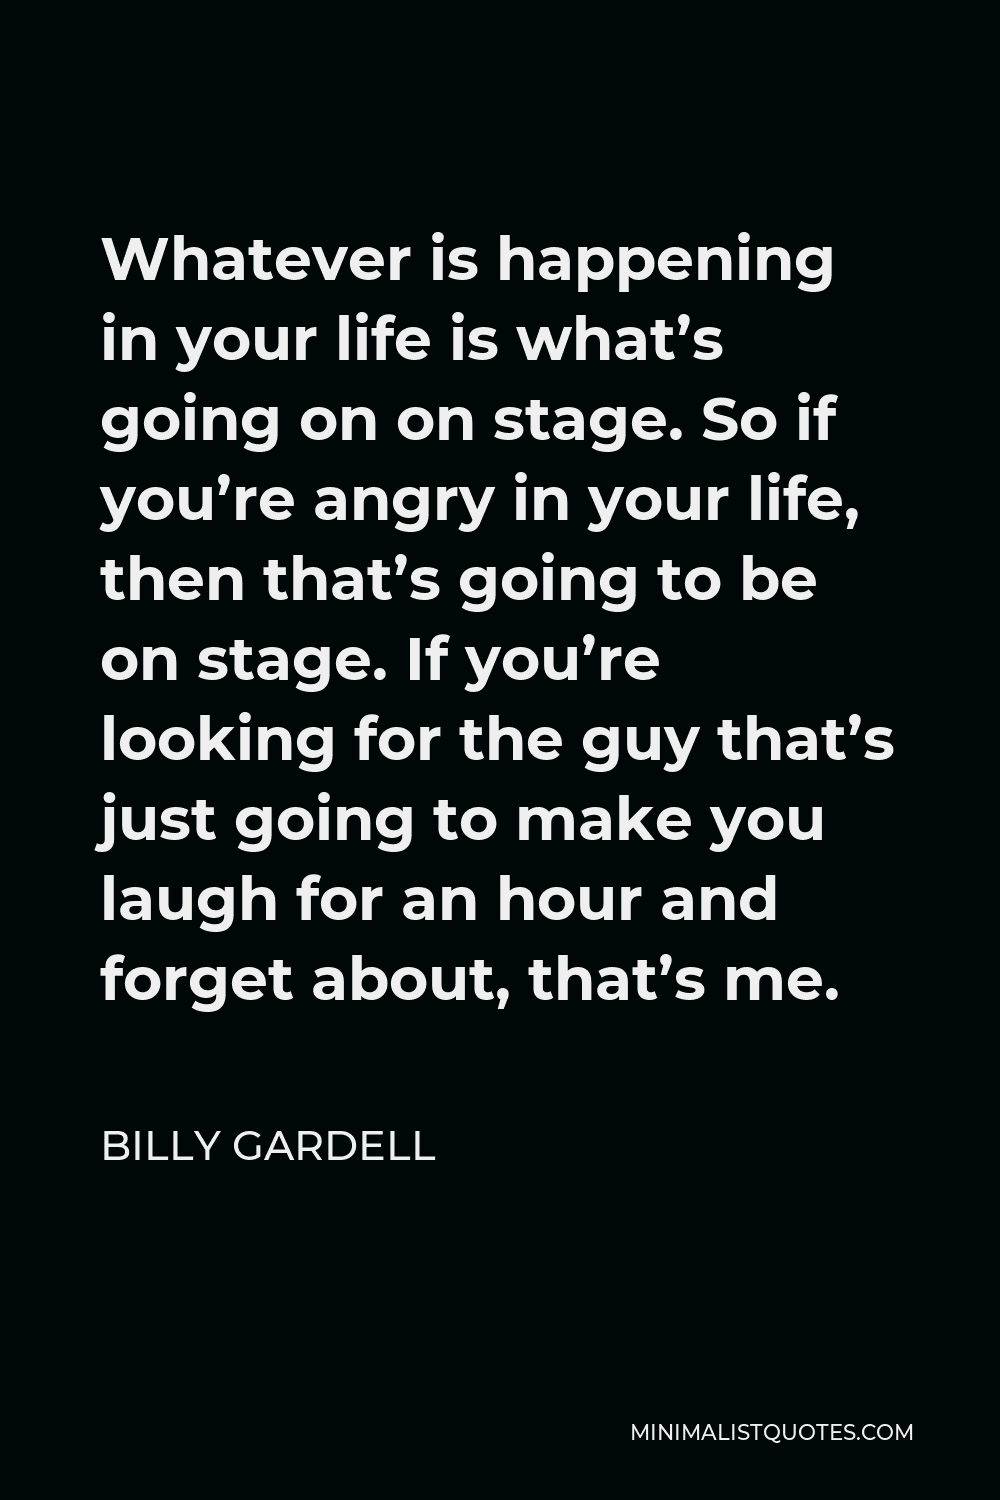 Billy Gardell Quote - Whatever is happening in your life is what’s going on on stage. So if you’re angry in your life, then that’s going to be on stage. If you’re looking for the guy that’s just going to make you laugh for an hour and forget about, that’s me.